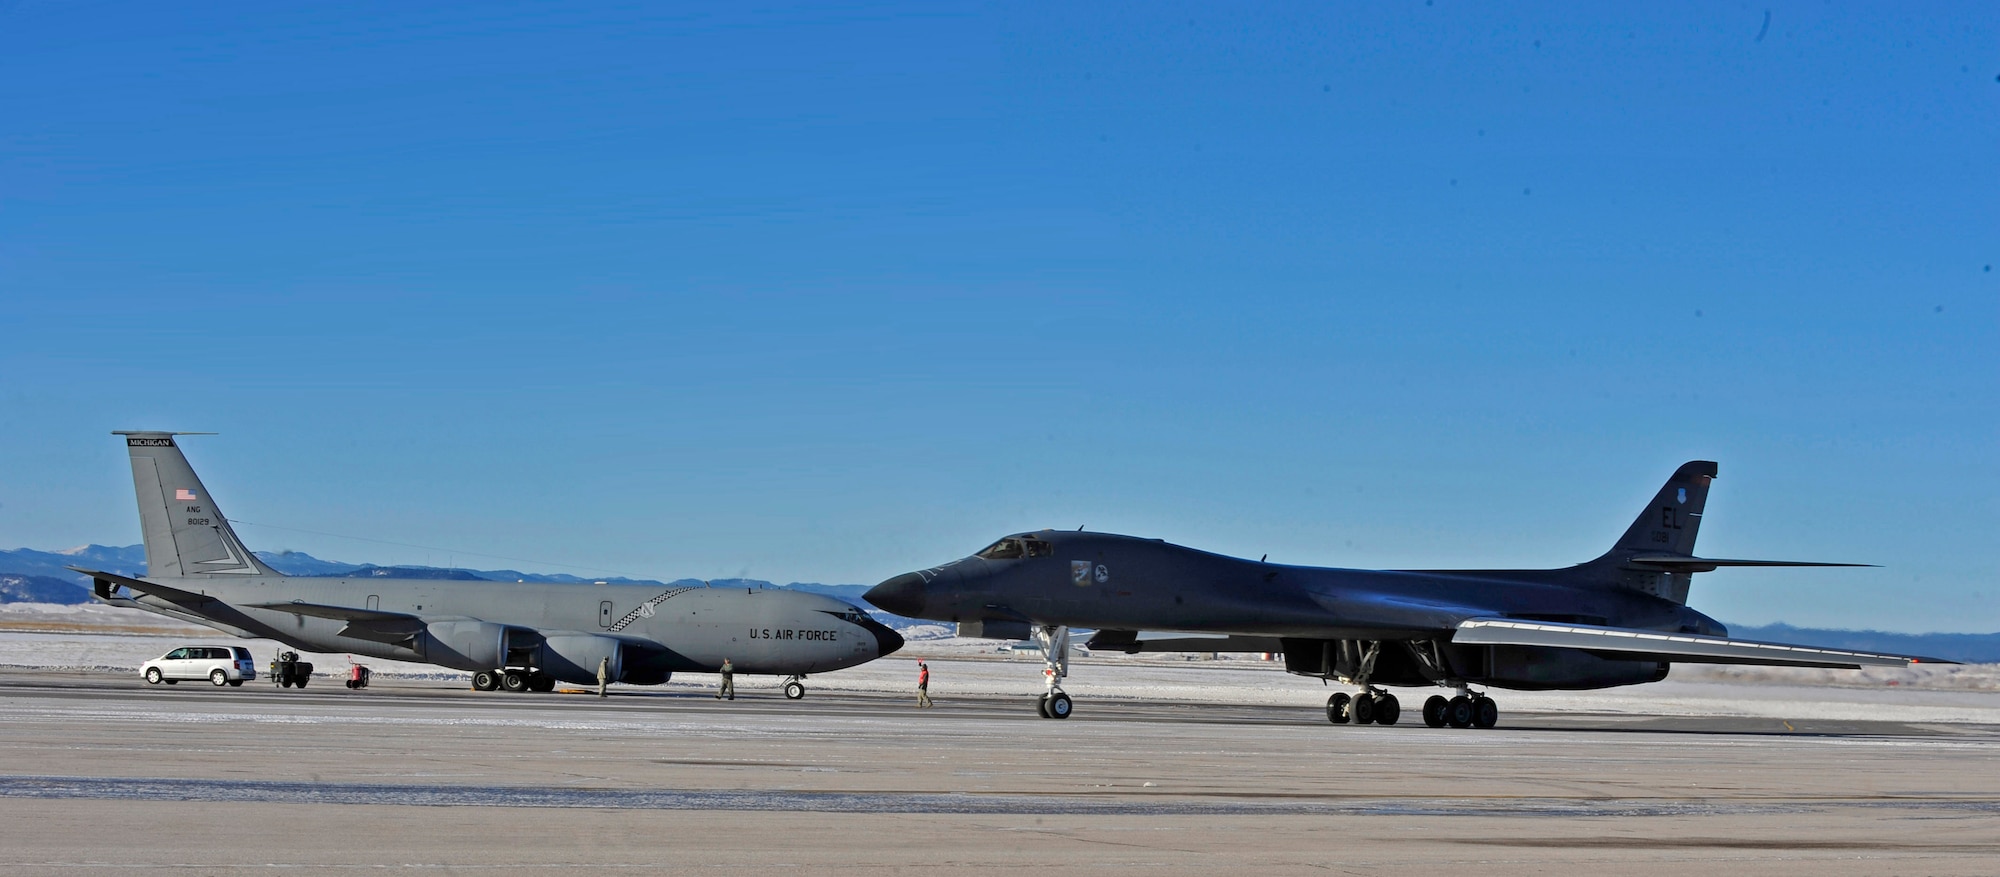 A B-1 bomber taxis past a KC-135 from Selfridge Air National Guard Base, Mich., at Ellsworth Air Force Base, S.D., Dec. 2, 2015. The KC-135 is providing air refueling during the first Large Force Exercise in the Powder River Training Complex. (U.S. Air Force photo by Airman 1st Class James L. Miller/Released)